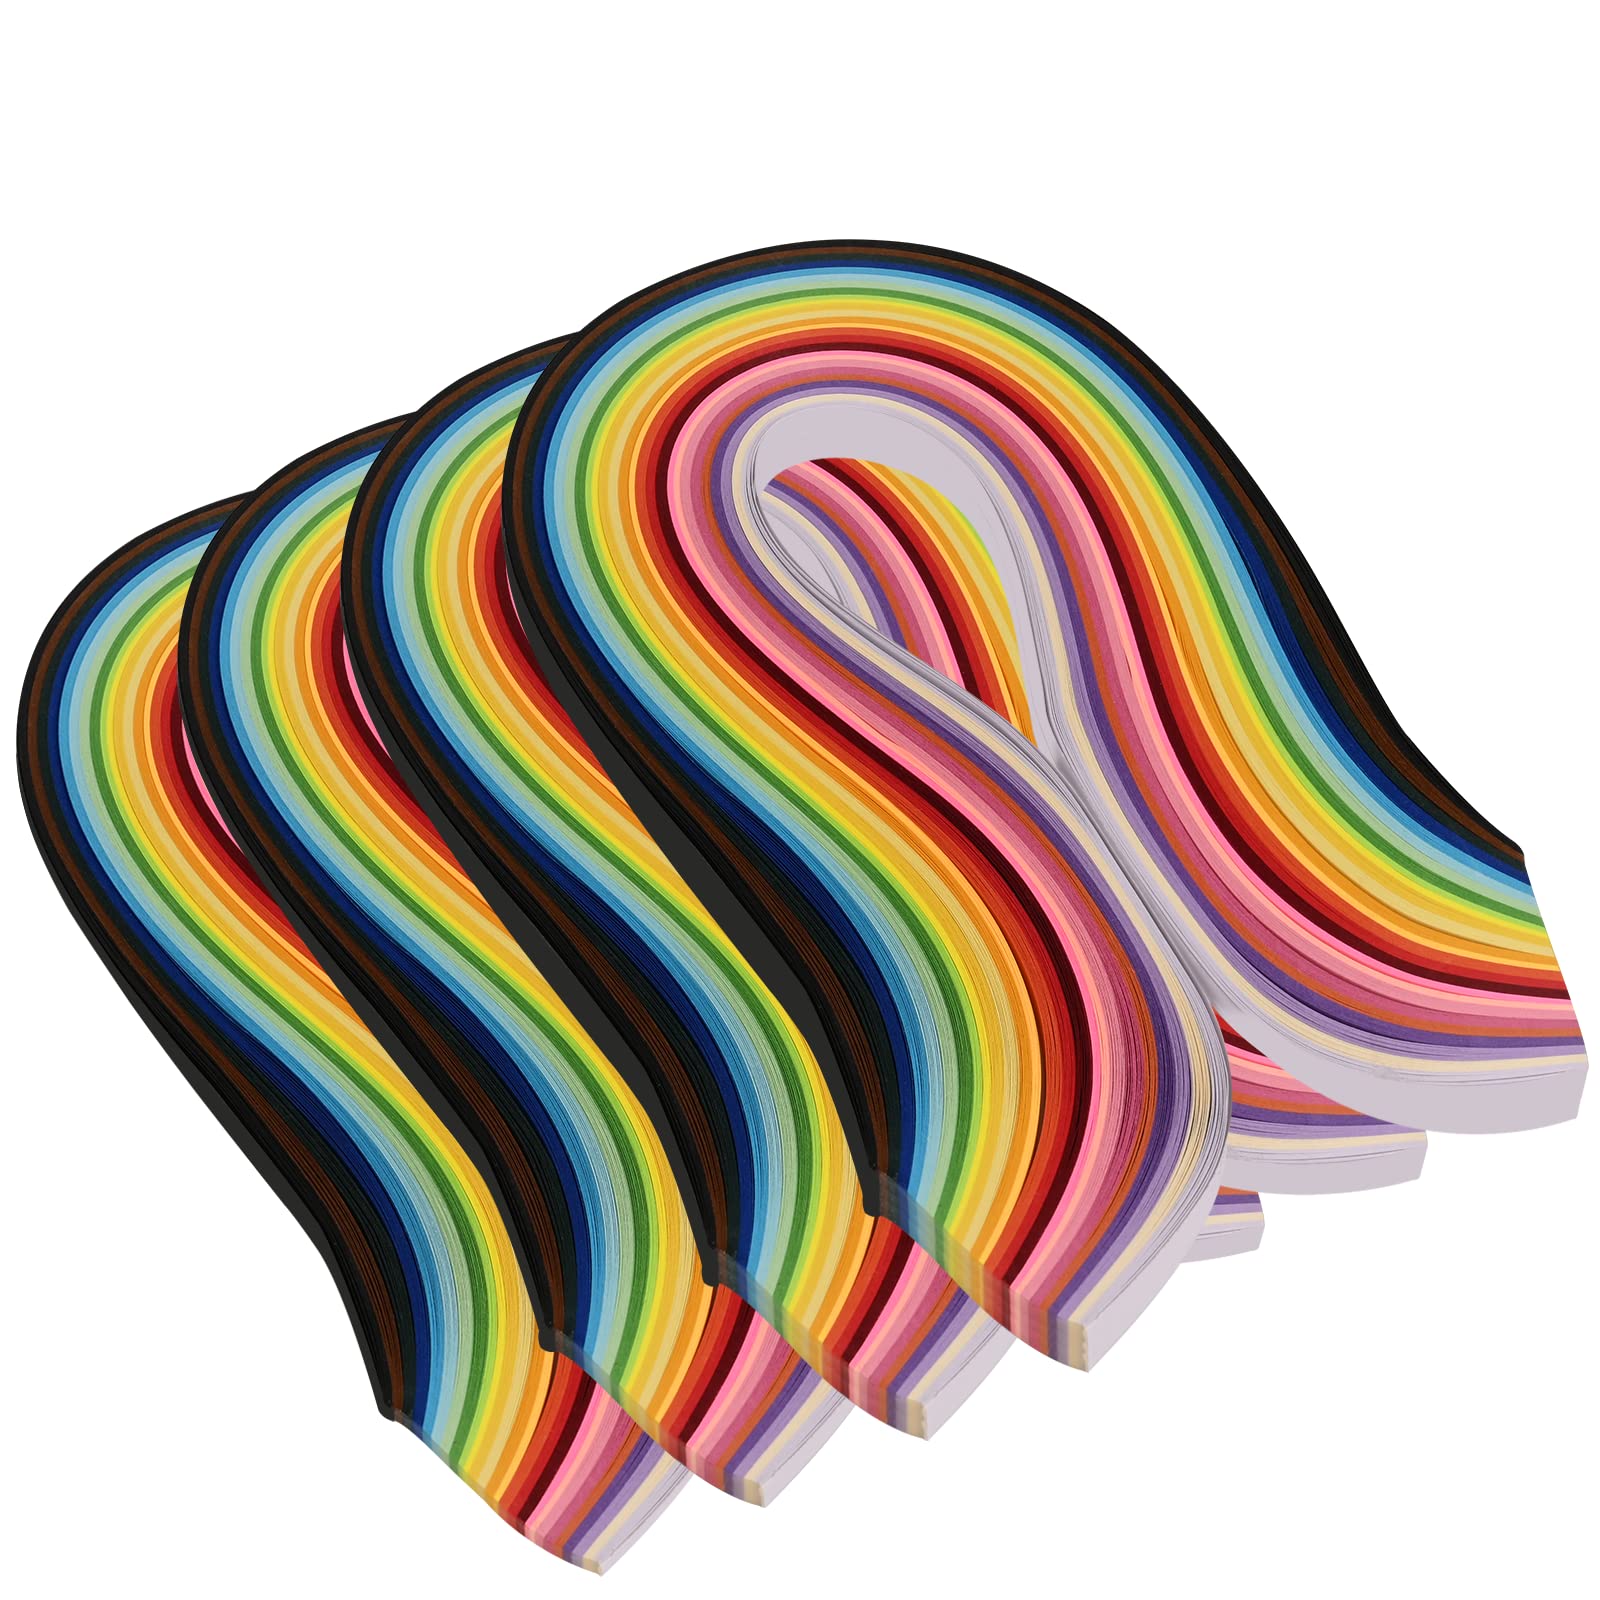 quilling-strips2020001-quilling-strips-3-mm-multicolor-8903558367859 —